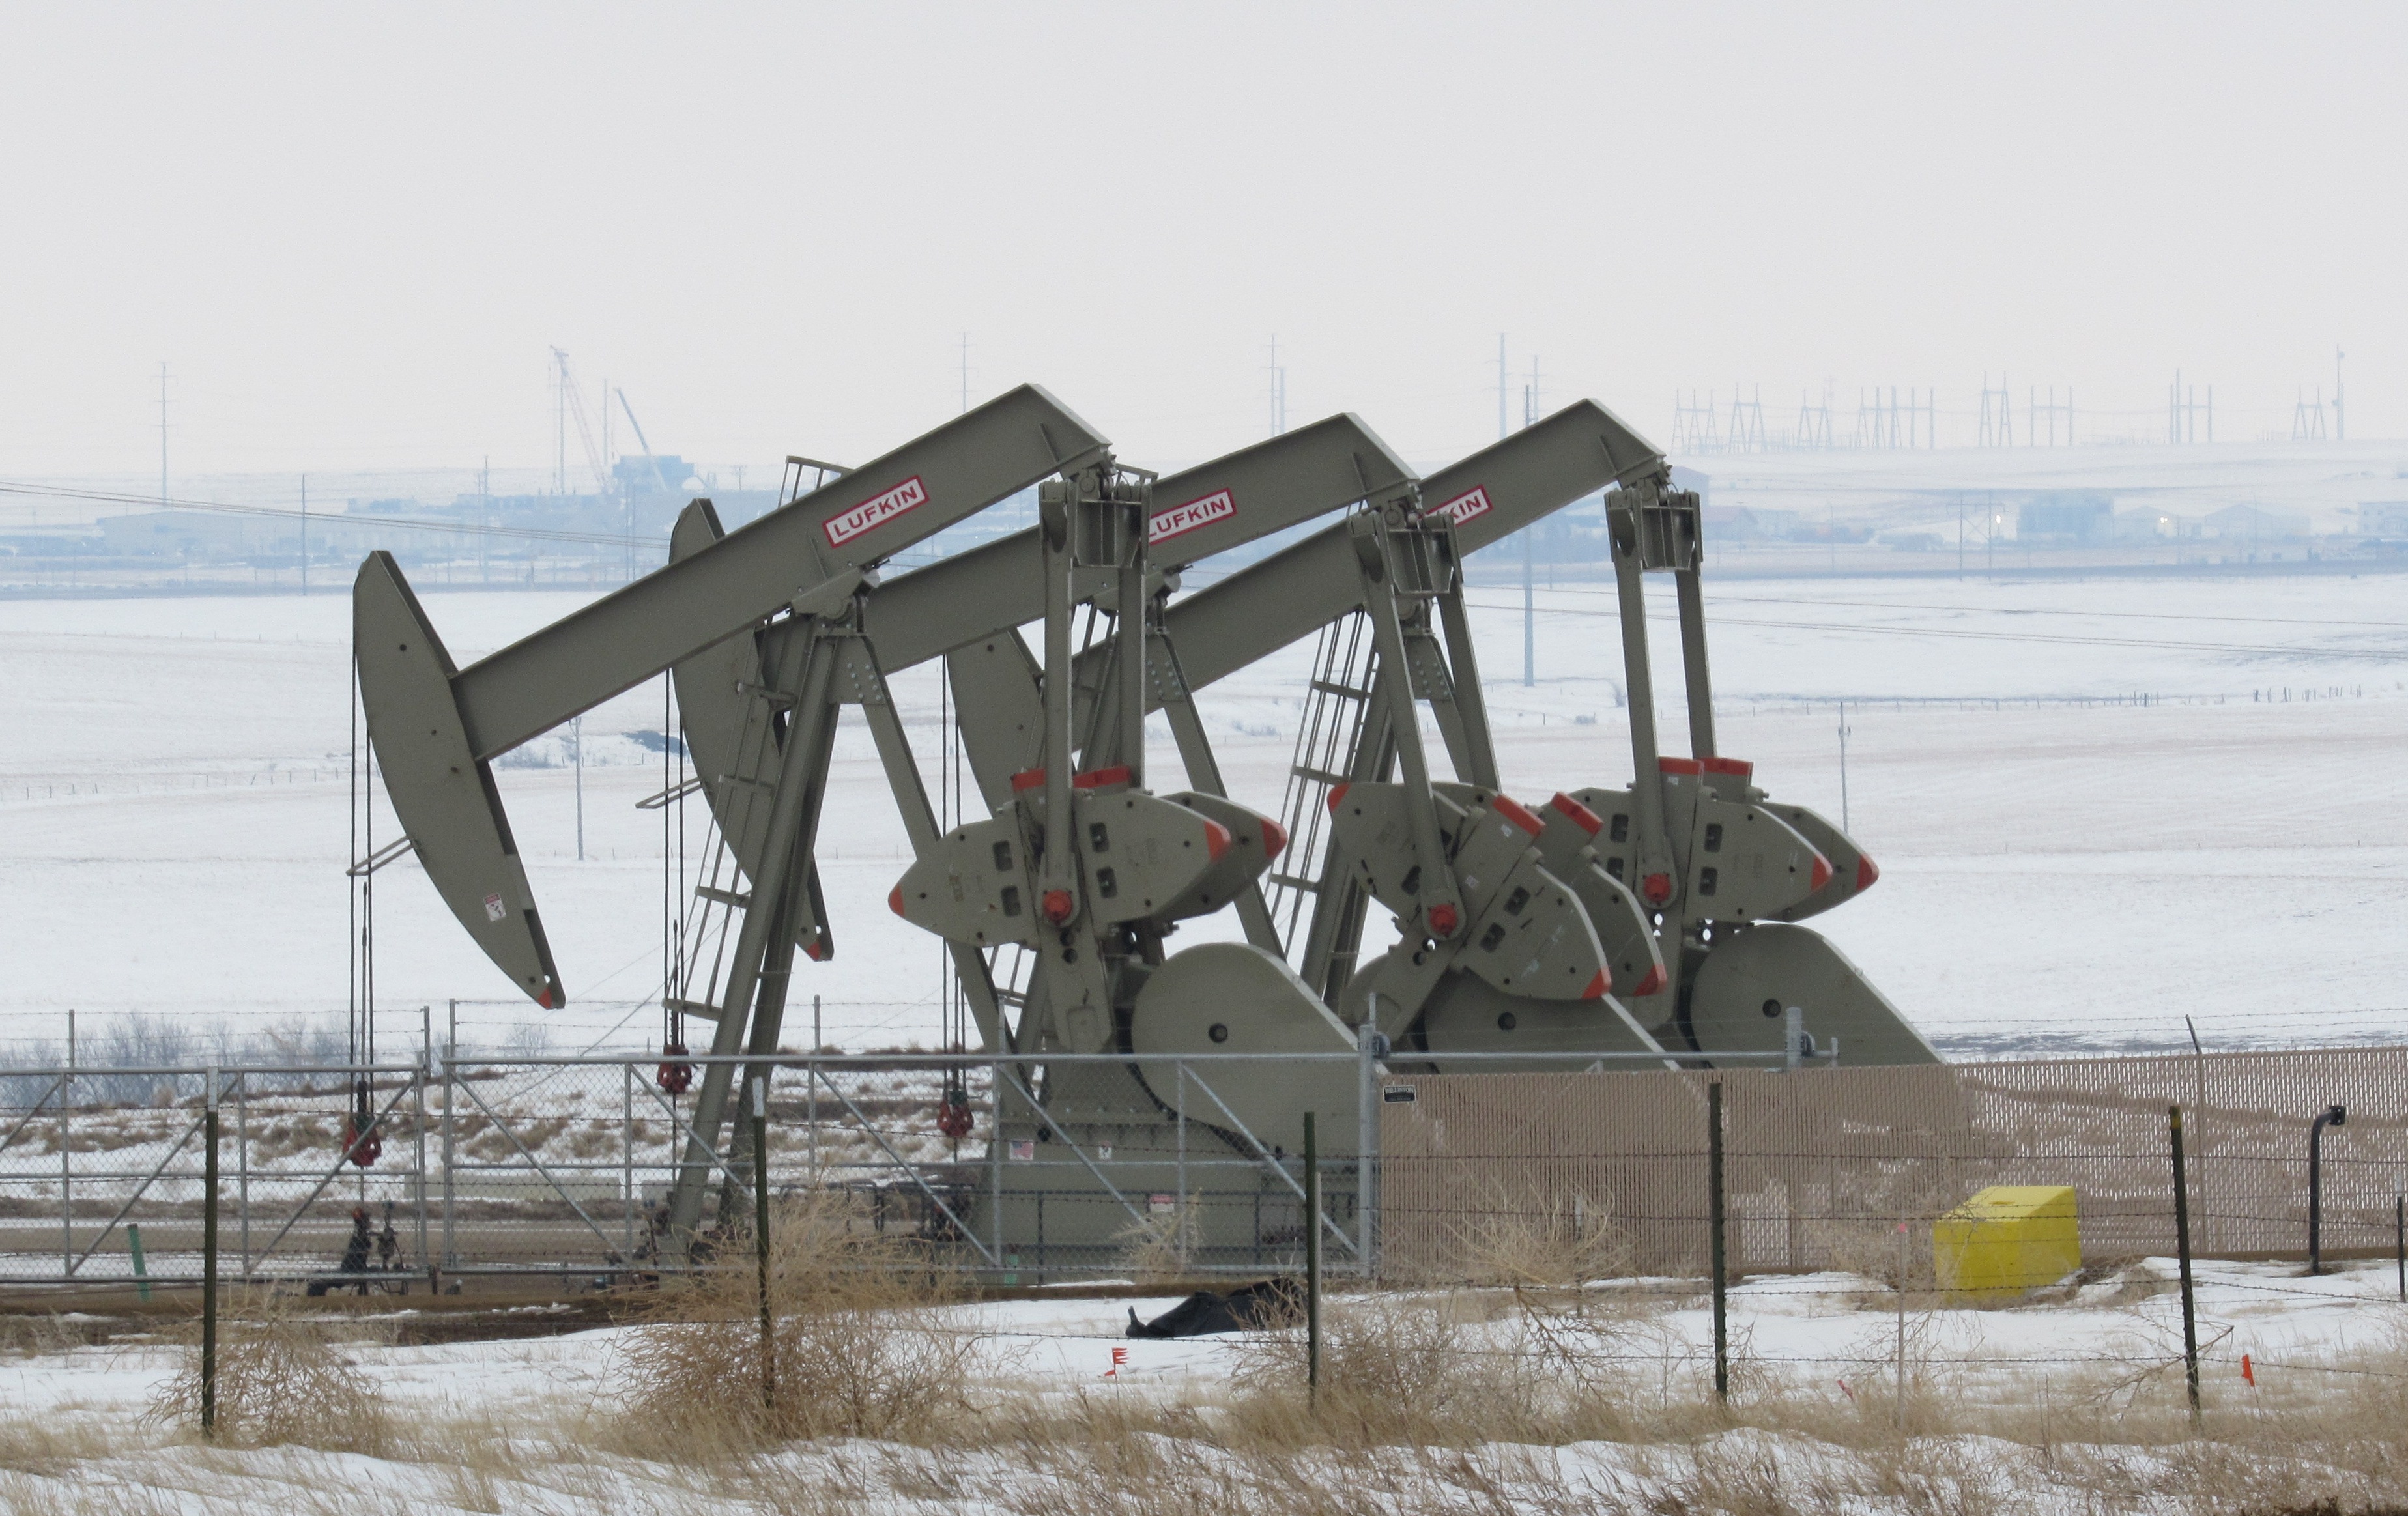 North Dakota oil production hits another record in September 2018 and